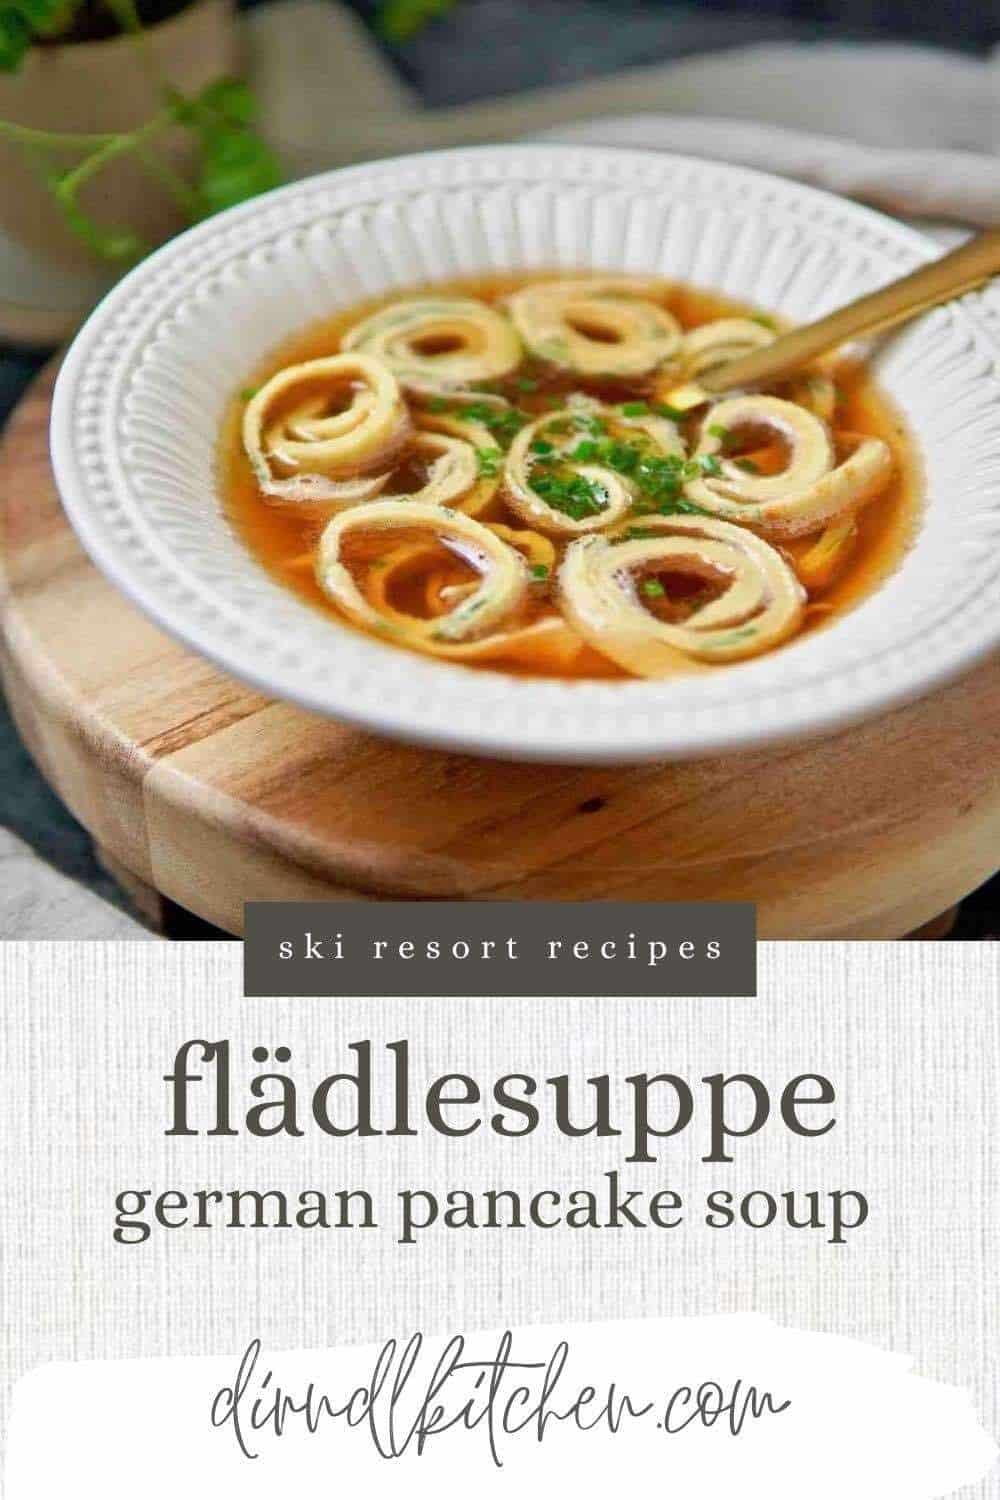 Fladlesuppe soup with pancakes dirndl kitchen